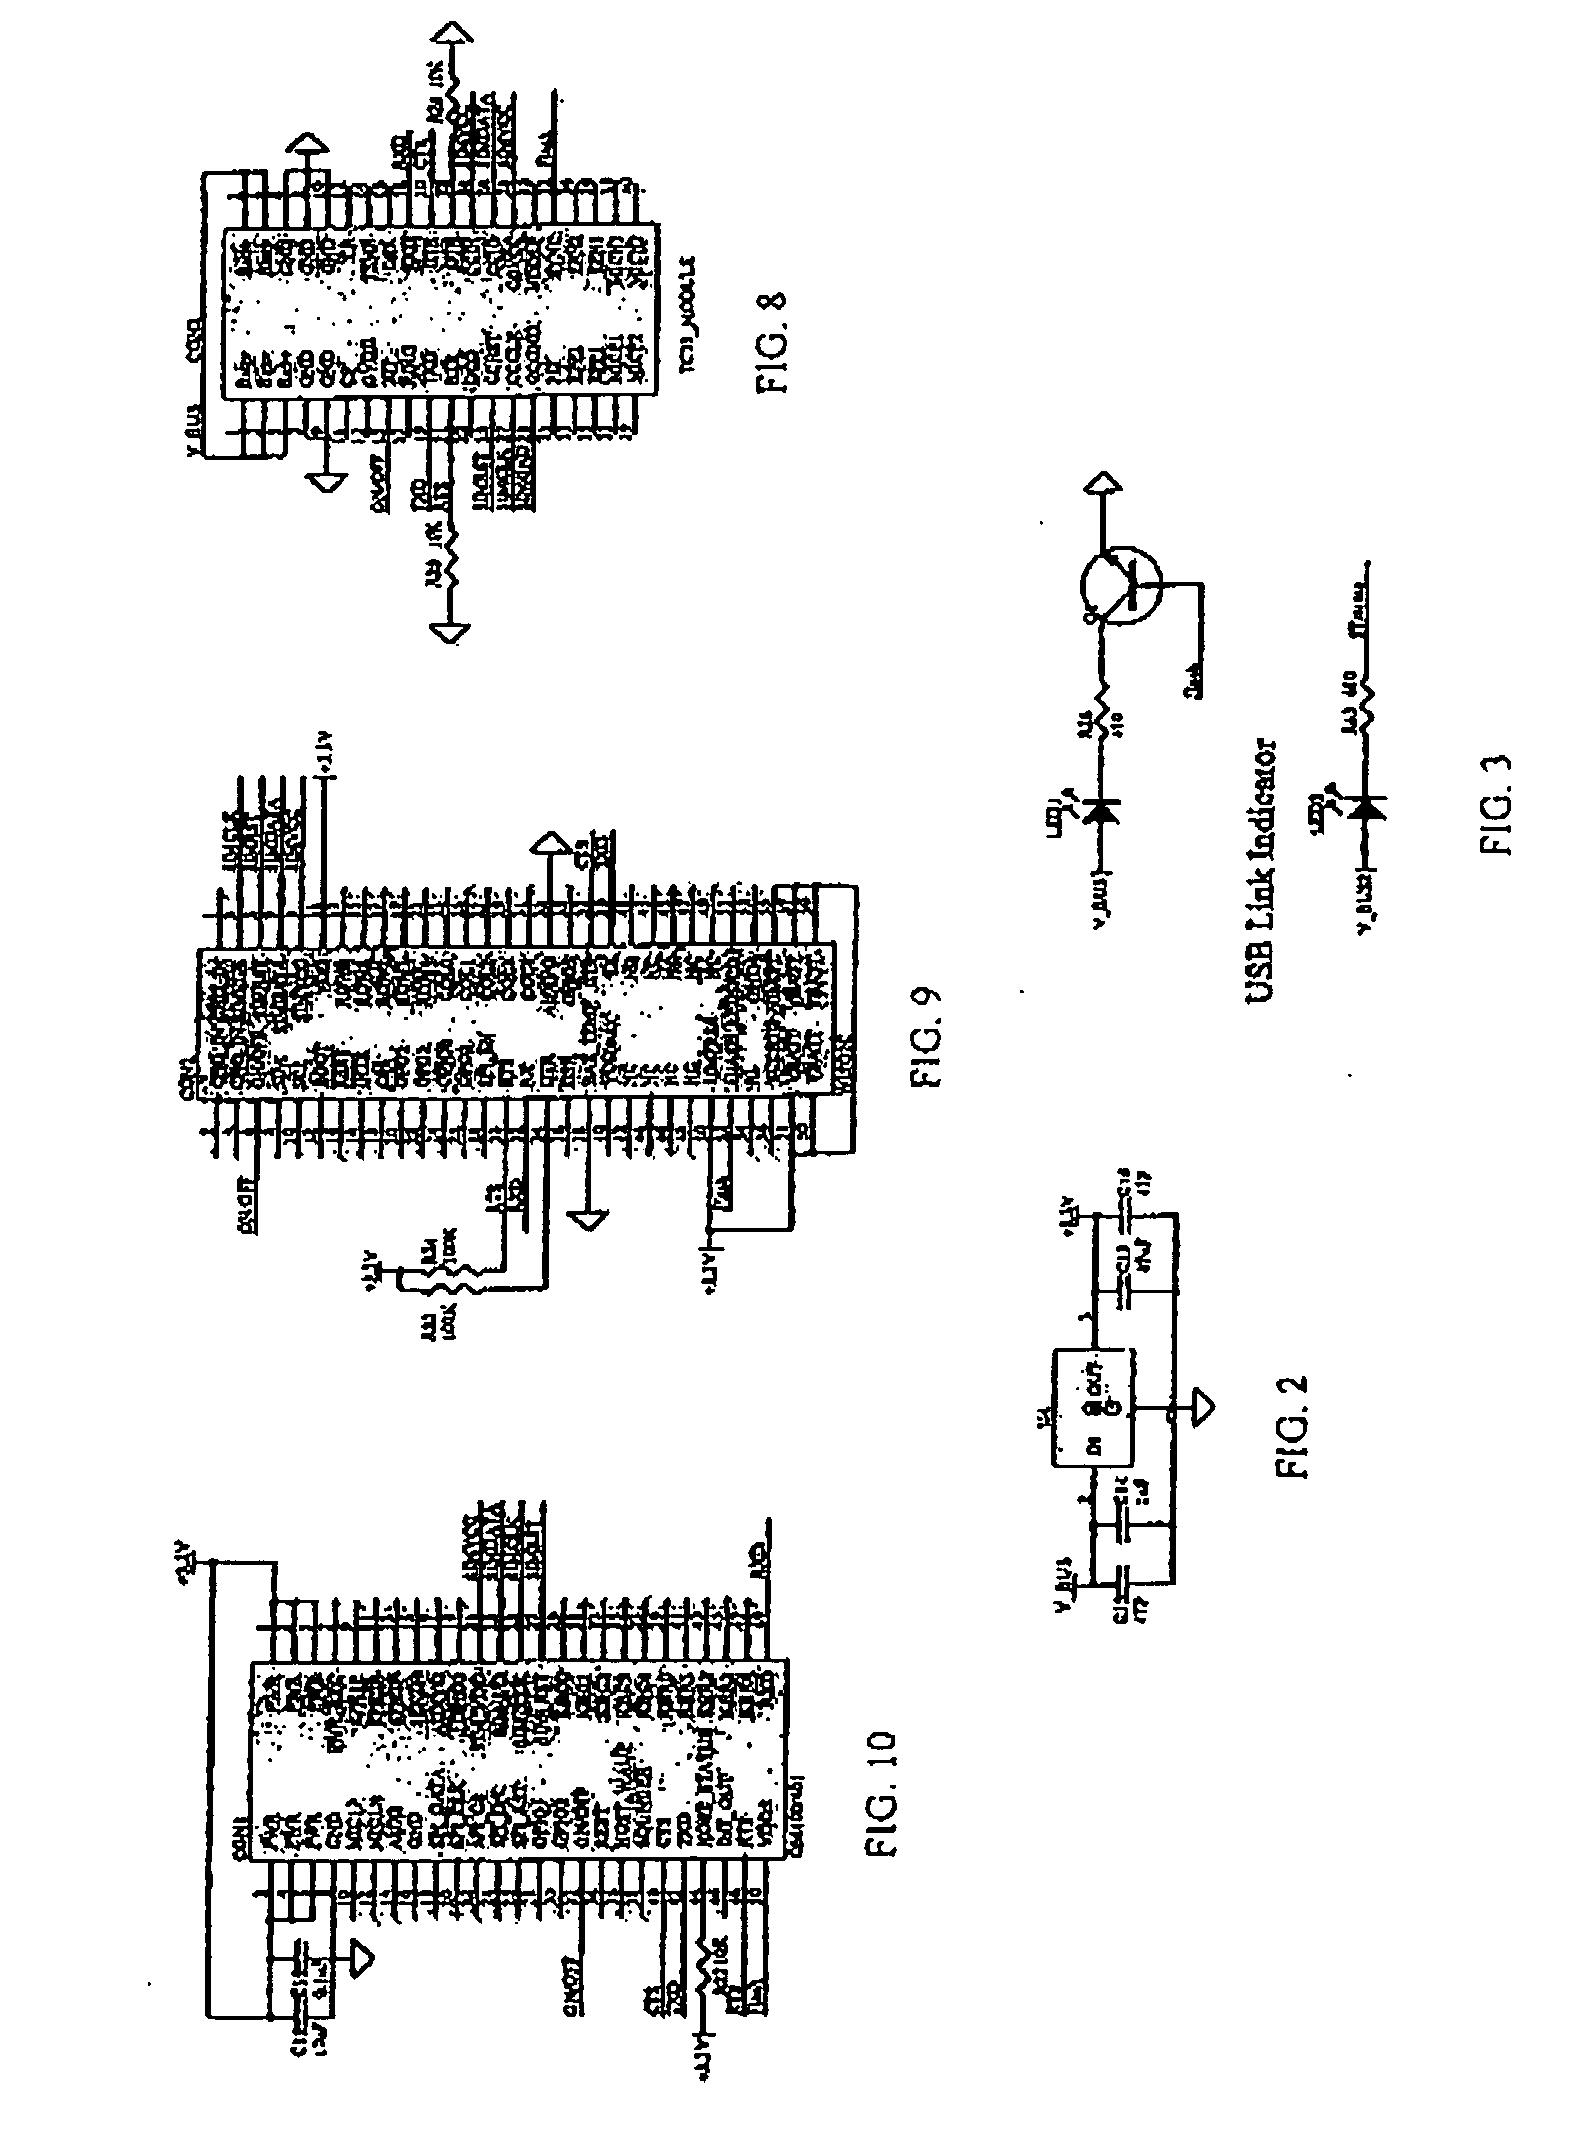 Method and system for wireless data communication in data processing system